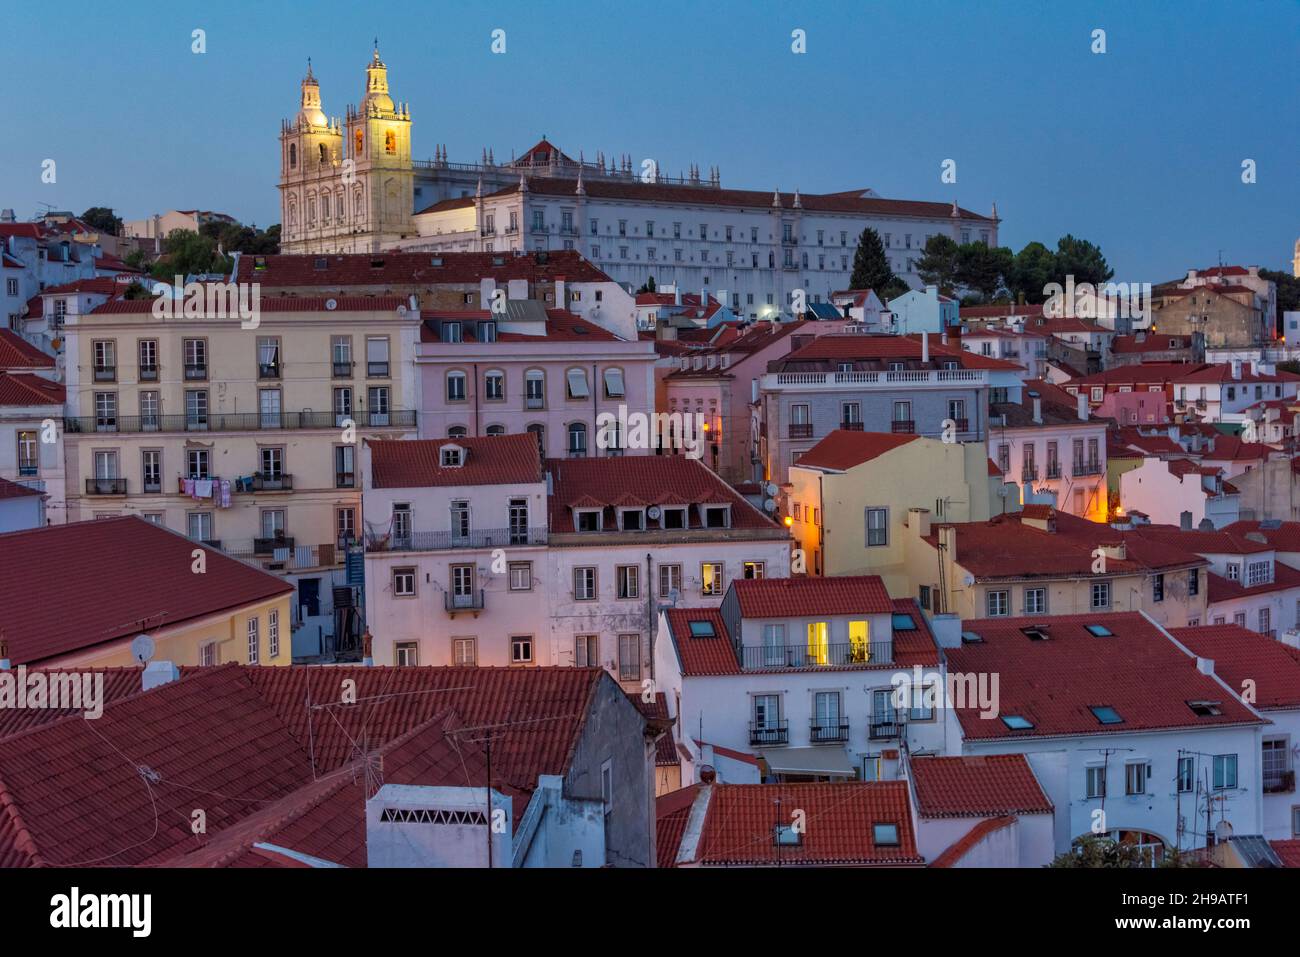 Night view of Monastery of São Vicente de Fora and red roofed houses in Alfama, one of Lisbon's oldest areas, Lisbon, Portugal Stock Photo